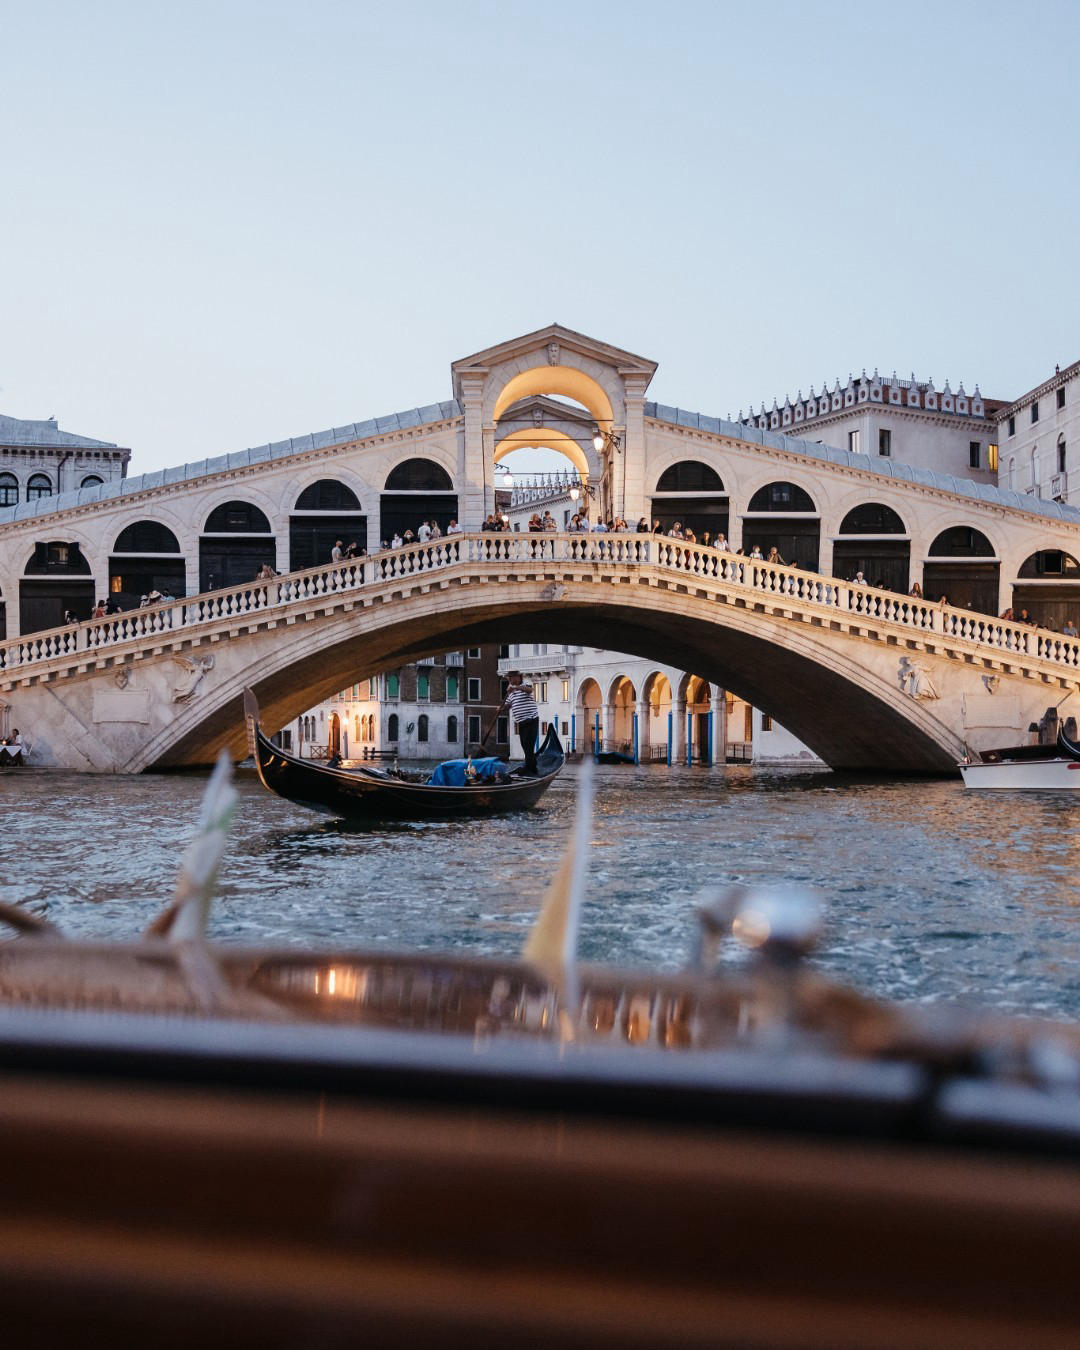 Aman Venice - As one year ends, another opens its arms to a future filled with possibility